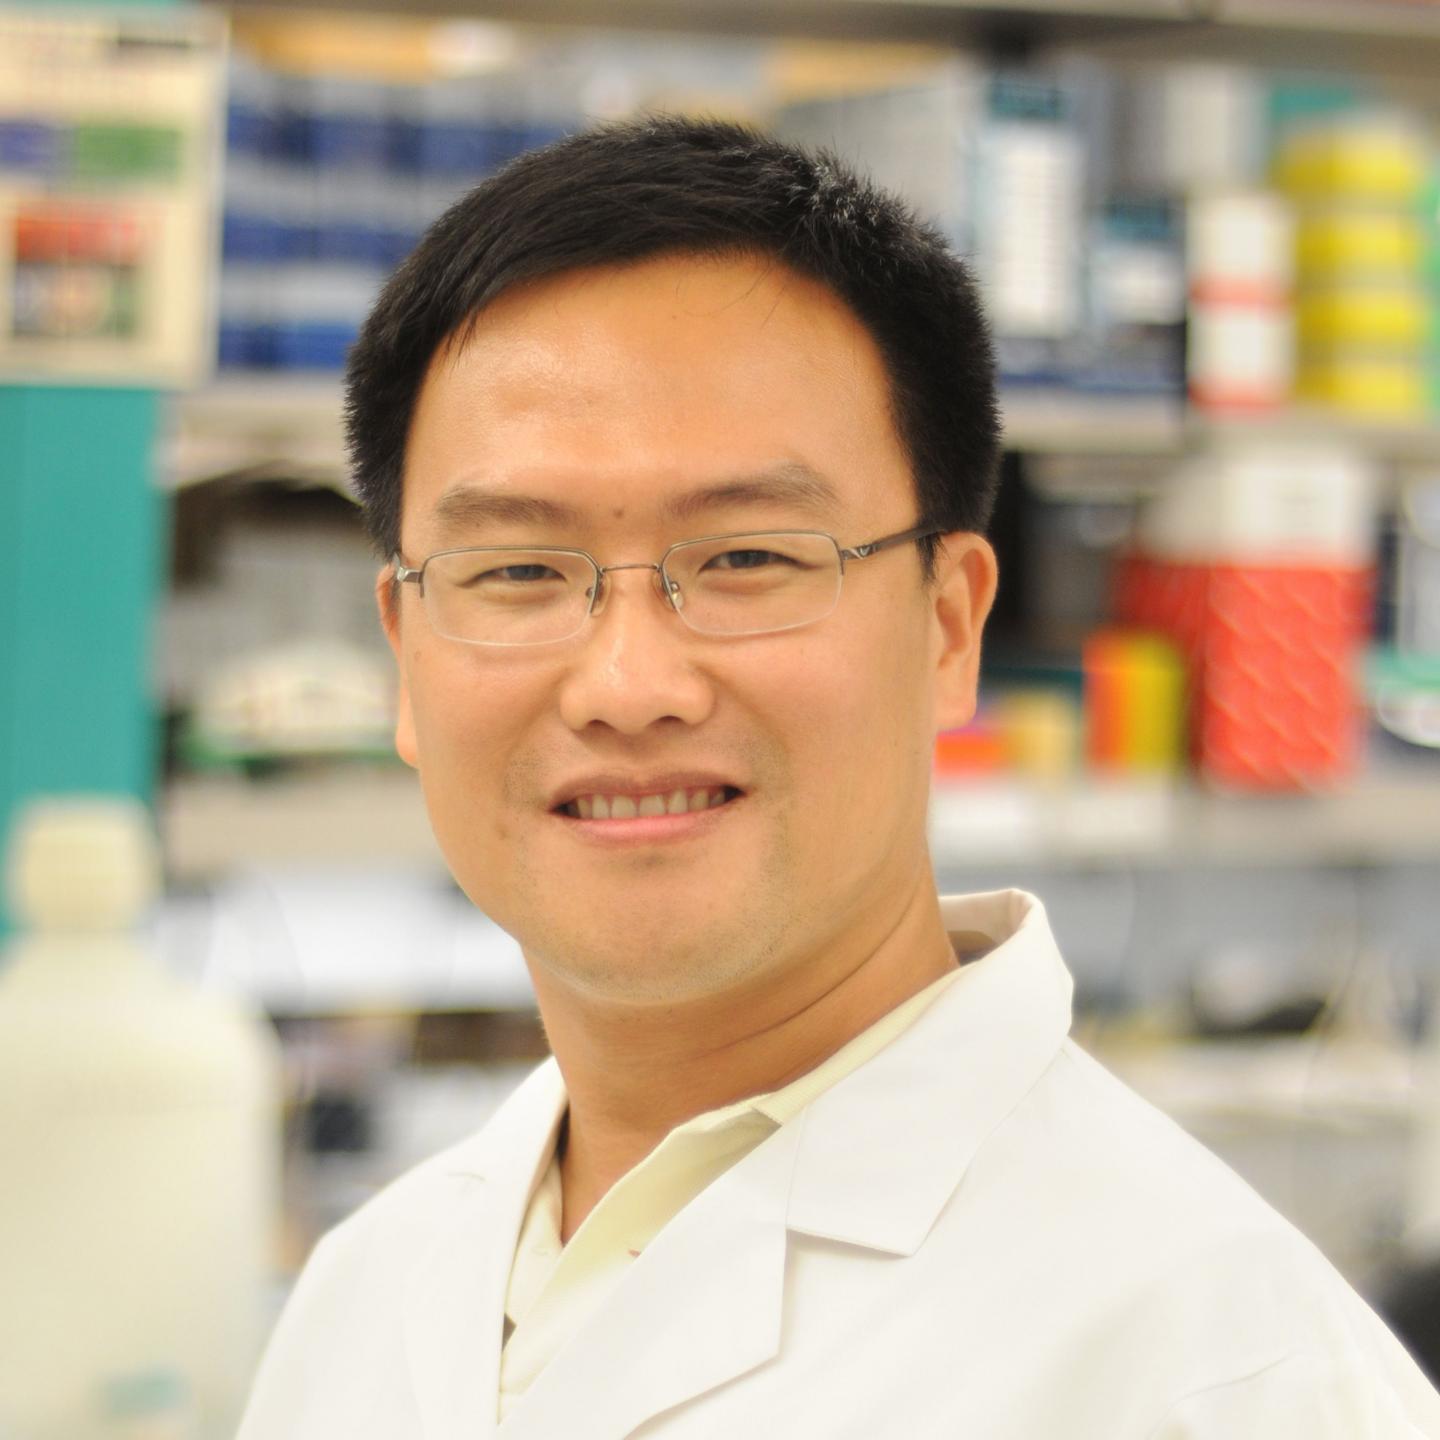 Xiang 'Shawn' Zhang, Baylor College of Medicine